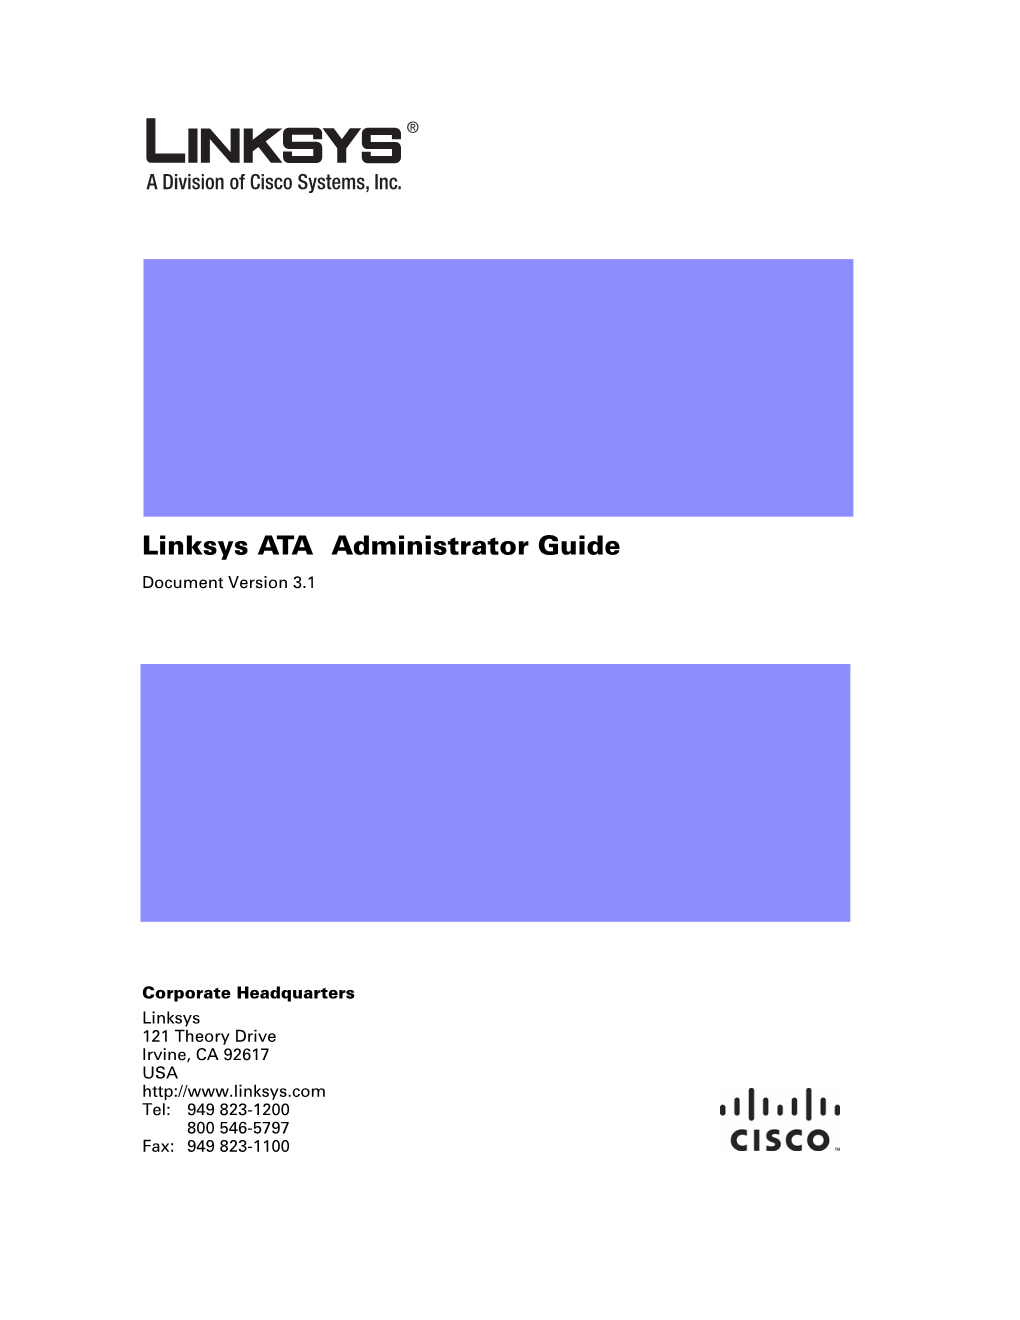 Linksys ATA Administrator Guide Document Version 3.1